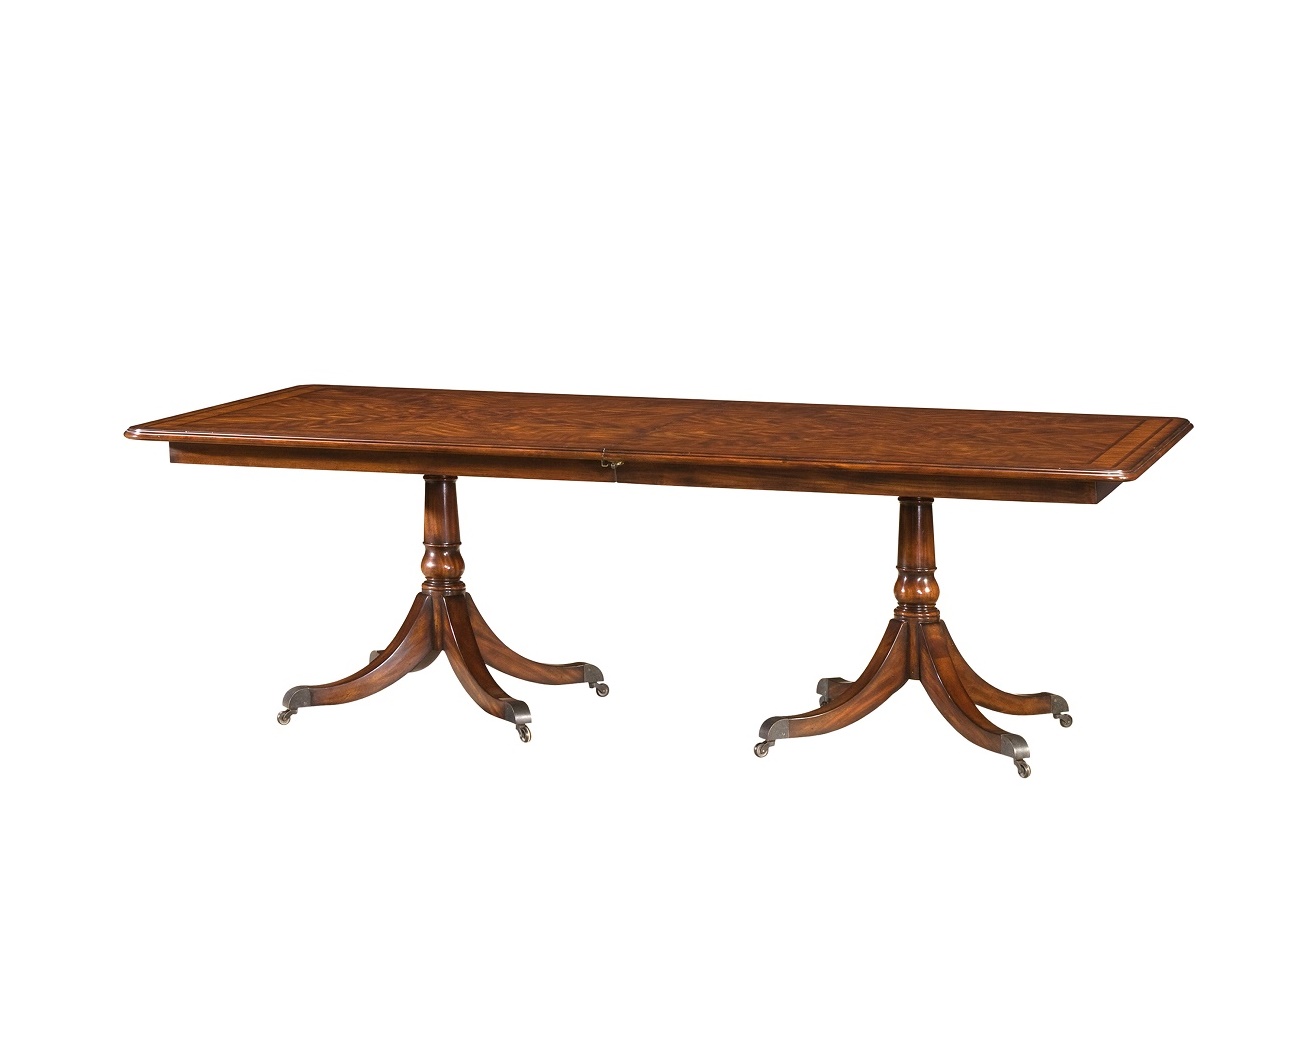 The Kensington Dining Table, Theodore Alexander Dining Table, Brooklyn, New York, Furniture by ABD